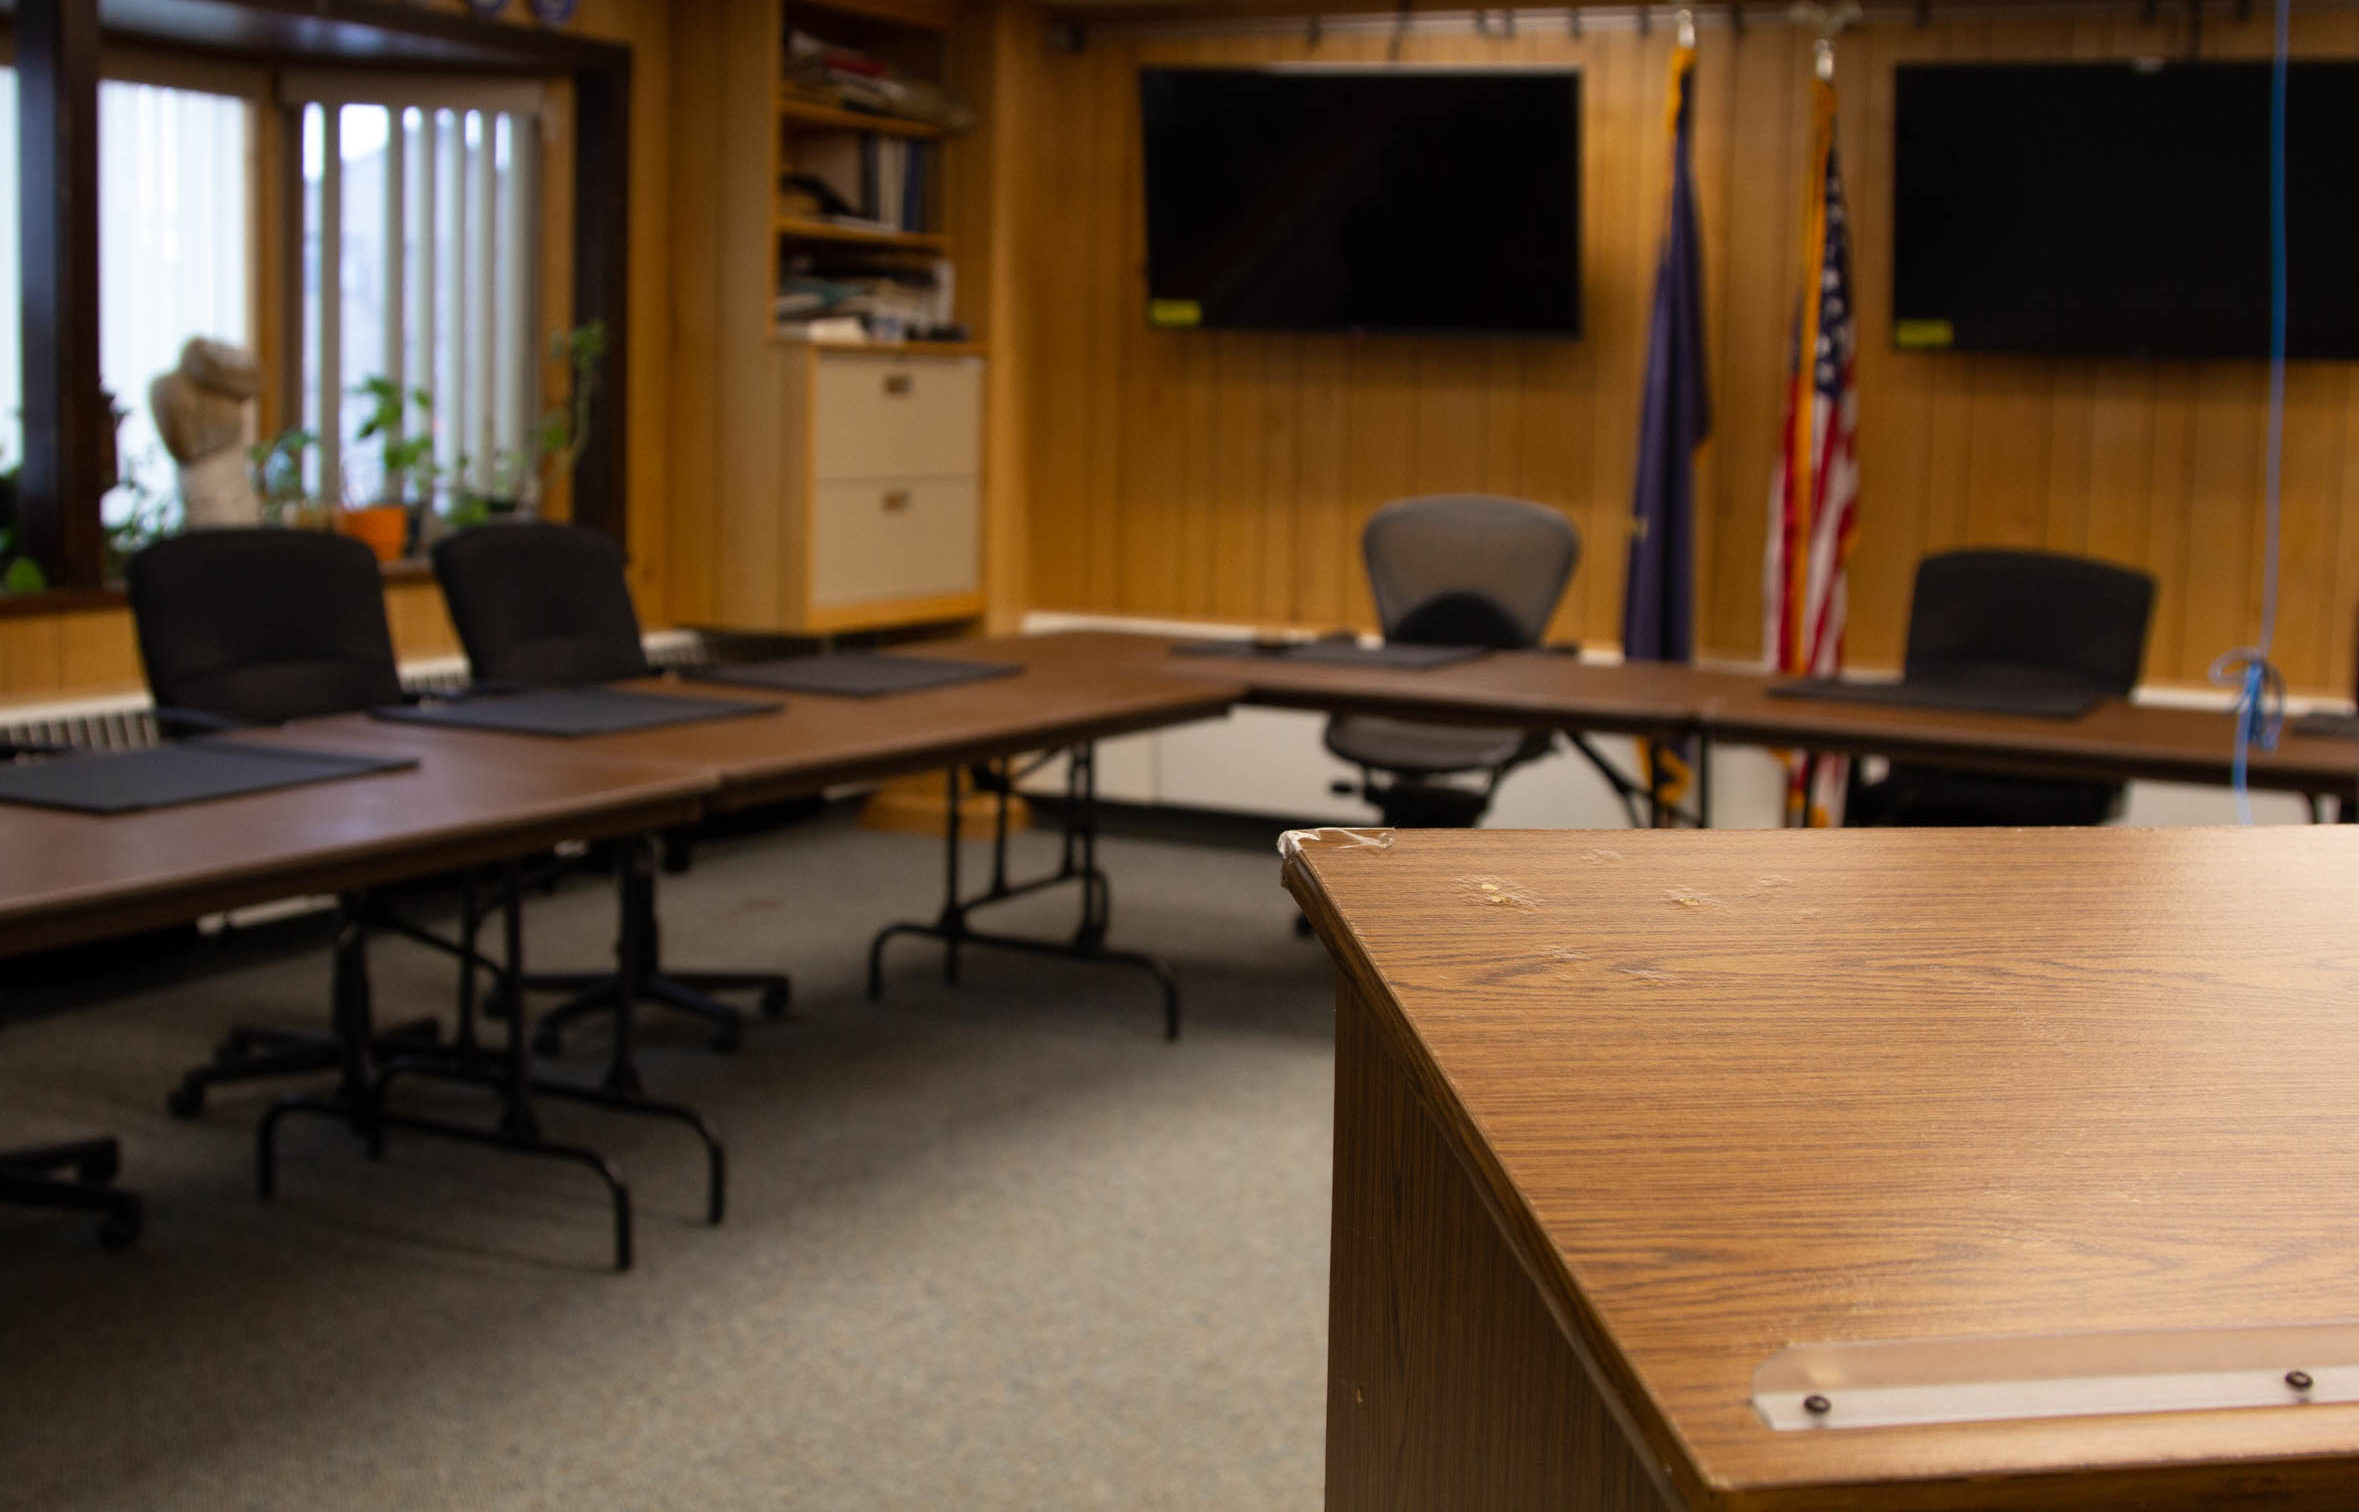 Cirty of Nome council chambers room. View from podium looking towards empty tables with chairs.